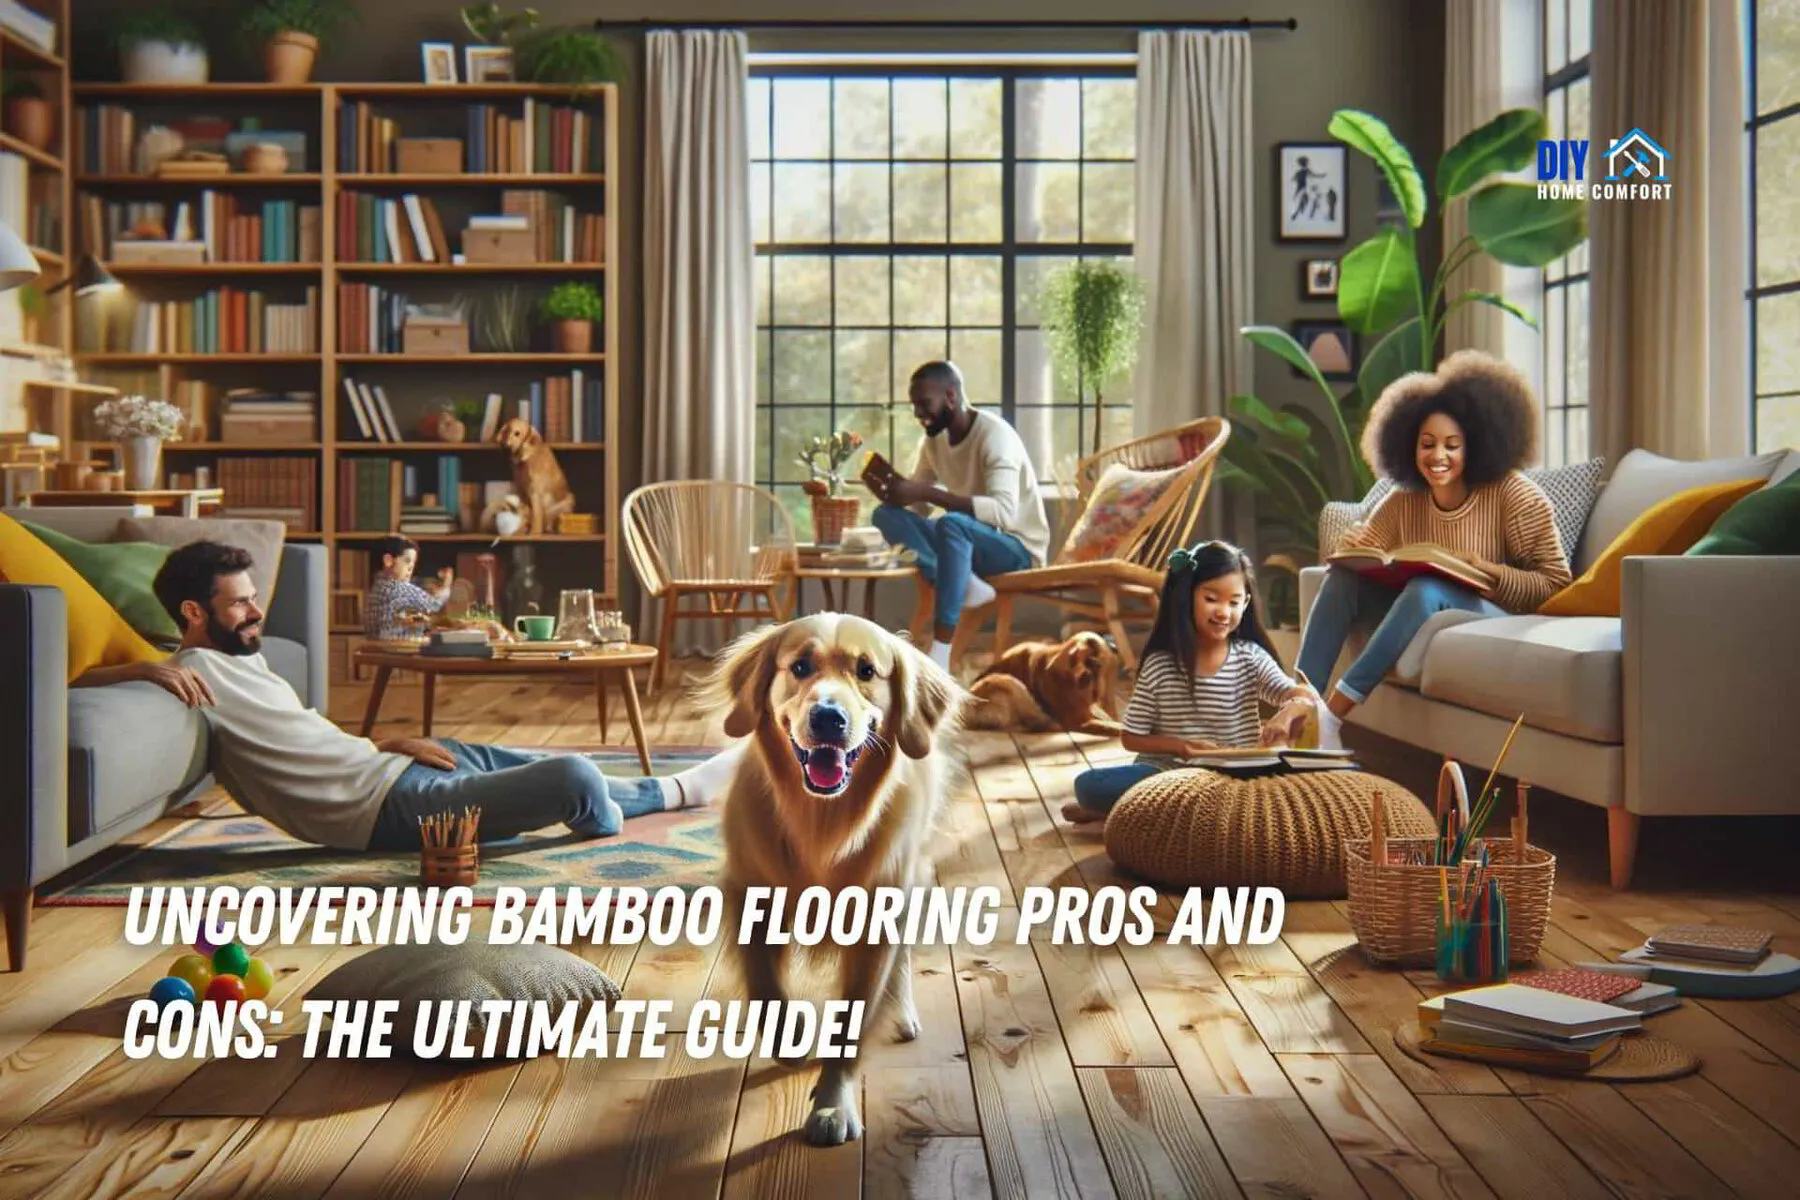 https://content.app-sources.com/s/40460189946594834/uploads/Blog_Images/Uncovering_Bamboo_Flooring_Pros_and_Cons_The_Ultimate_Guide-2344256.jpg?format=webp